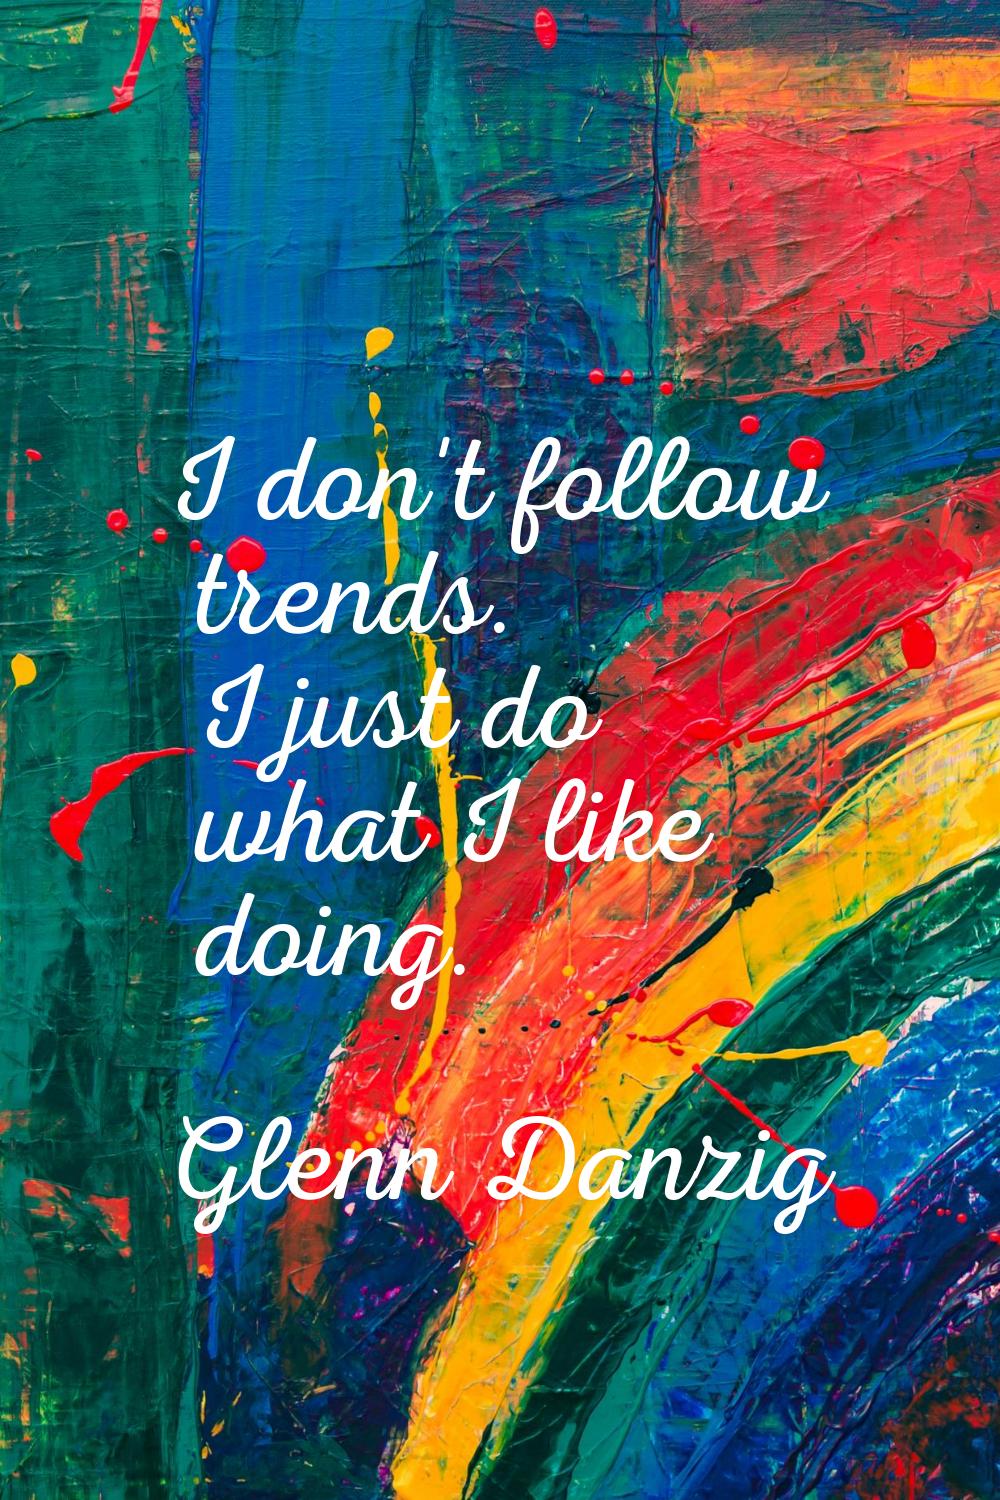 I don't follow trends. I just do what I like doing.